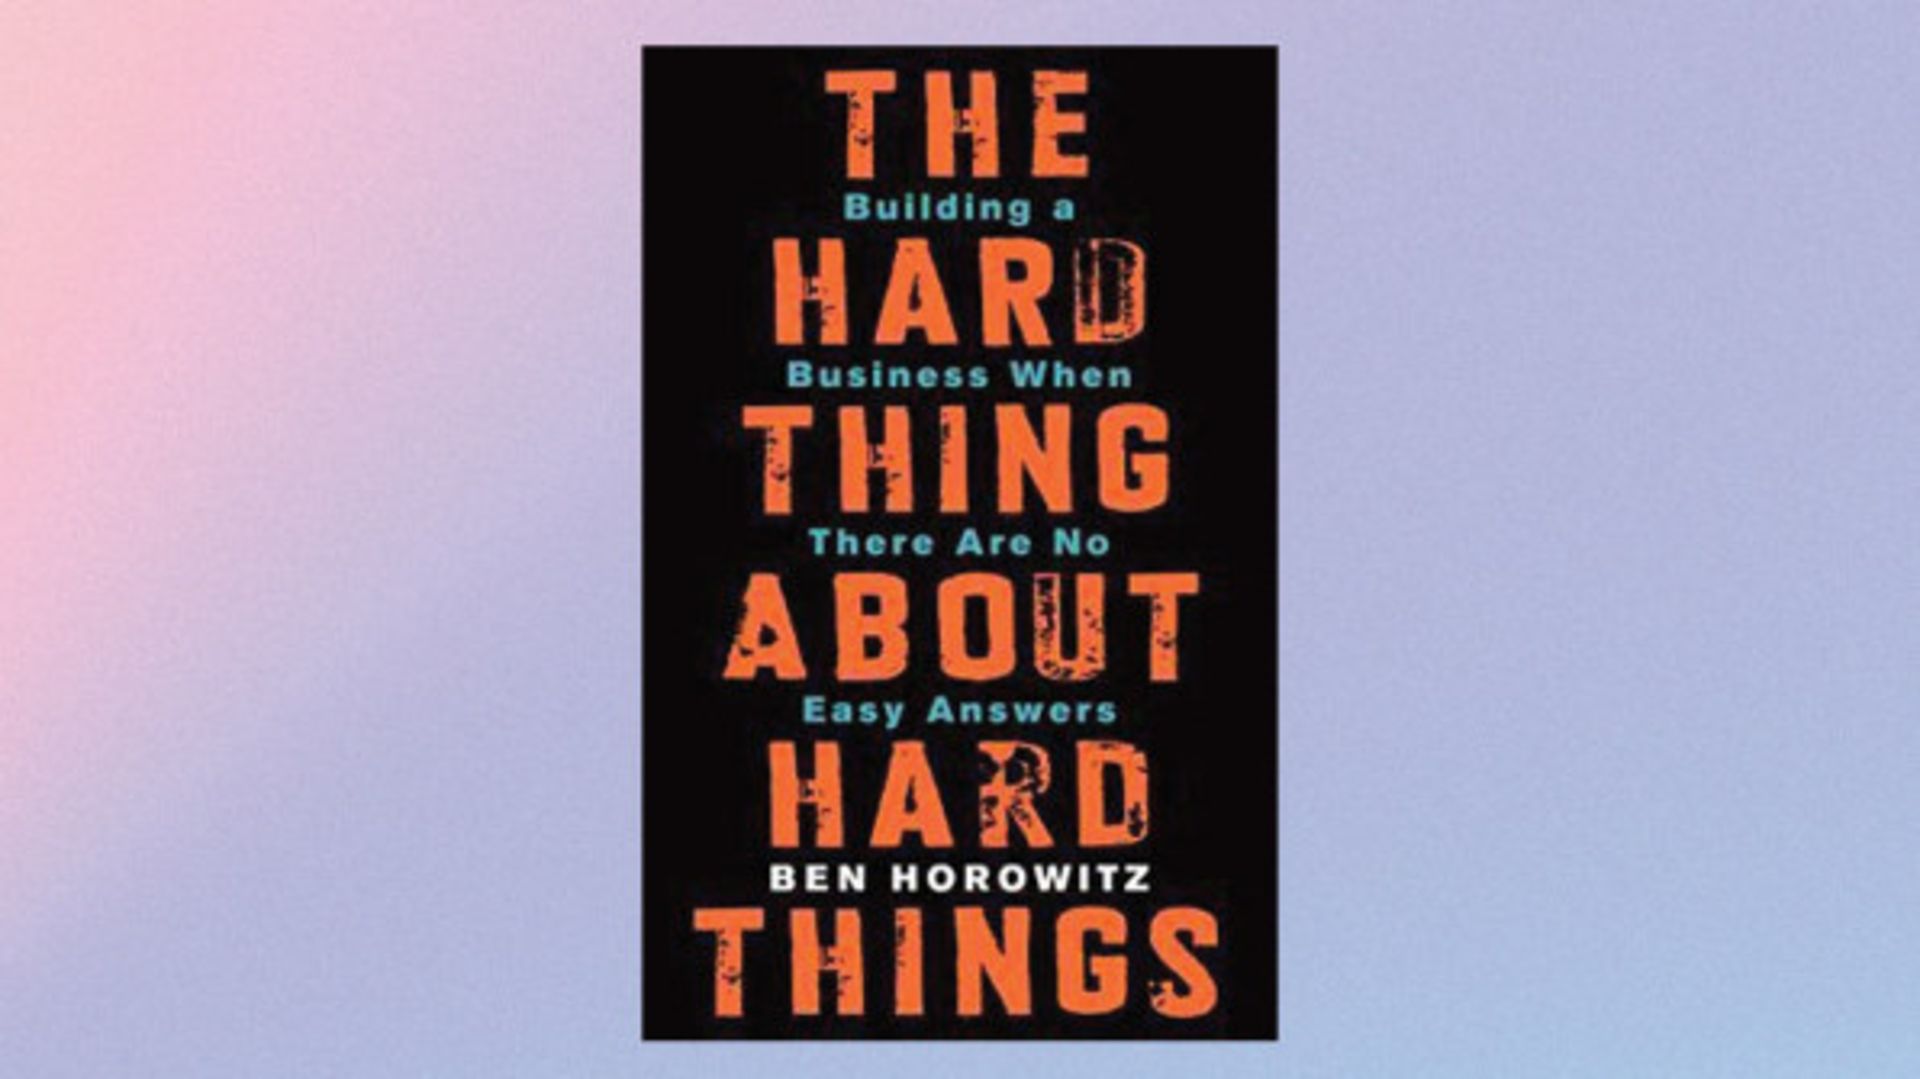 THE HARD THING ABOUT HARD THINGS: BUILDING A BUSINESS WHEN THERE ARE NO EASY ANSWERS BY BEN HOROWITZ